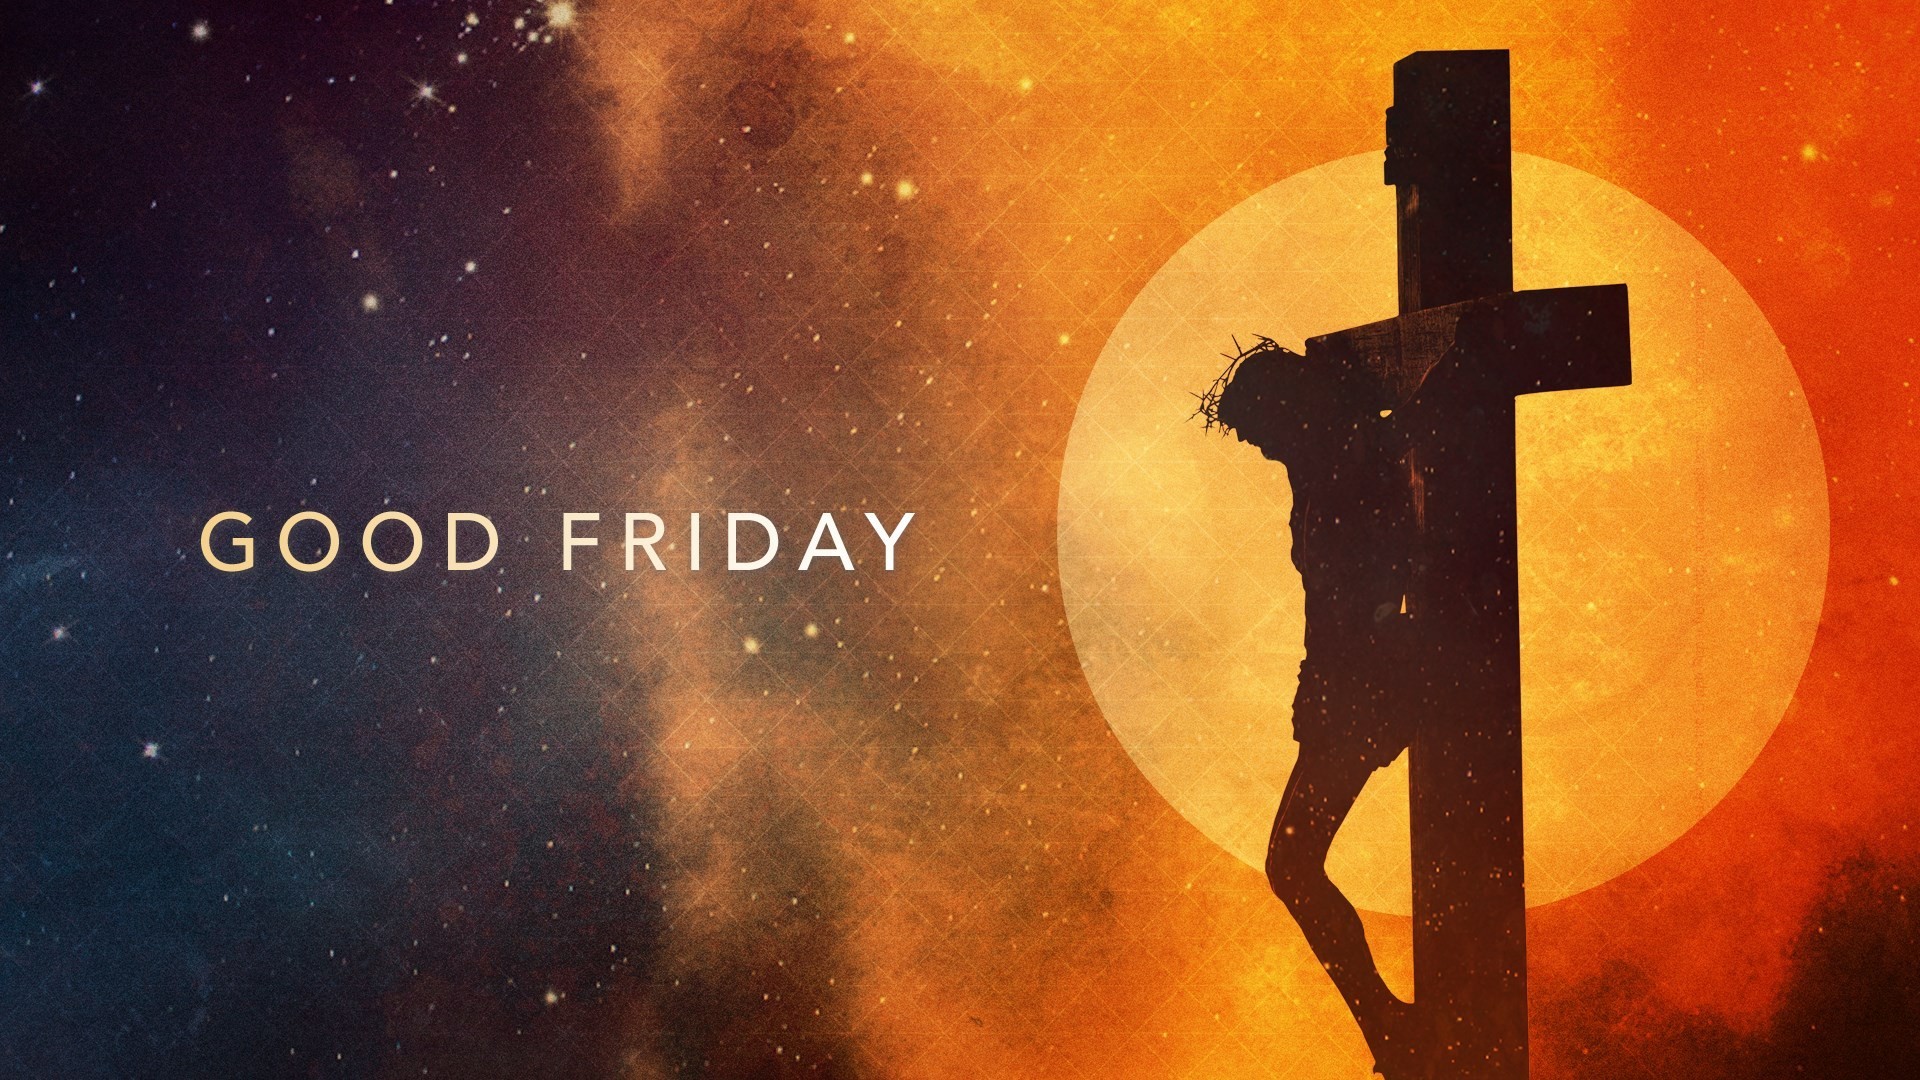 1920x1080, Good Friday Images Photos Pics & Pictures - Jesus Crucified Good Friday - HD Wallpaper 